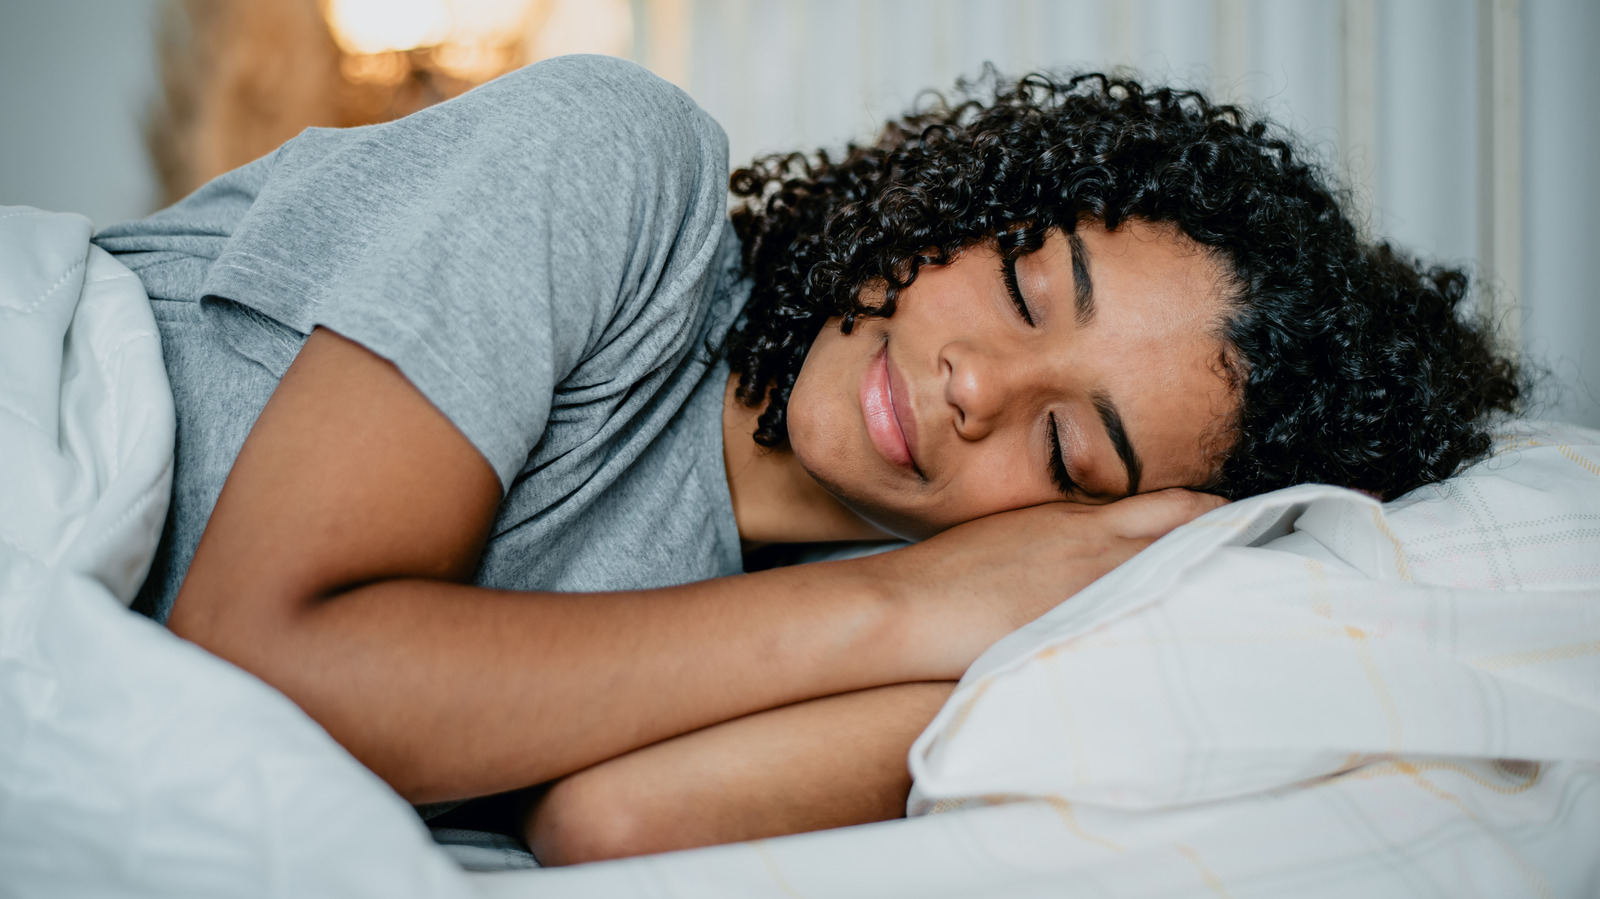 Try This Childhood Trick To Make Falling Asleep Easier - Health Digest